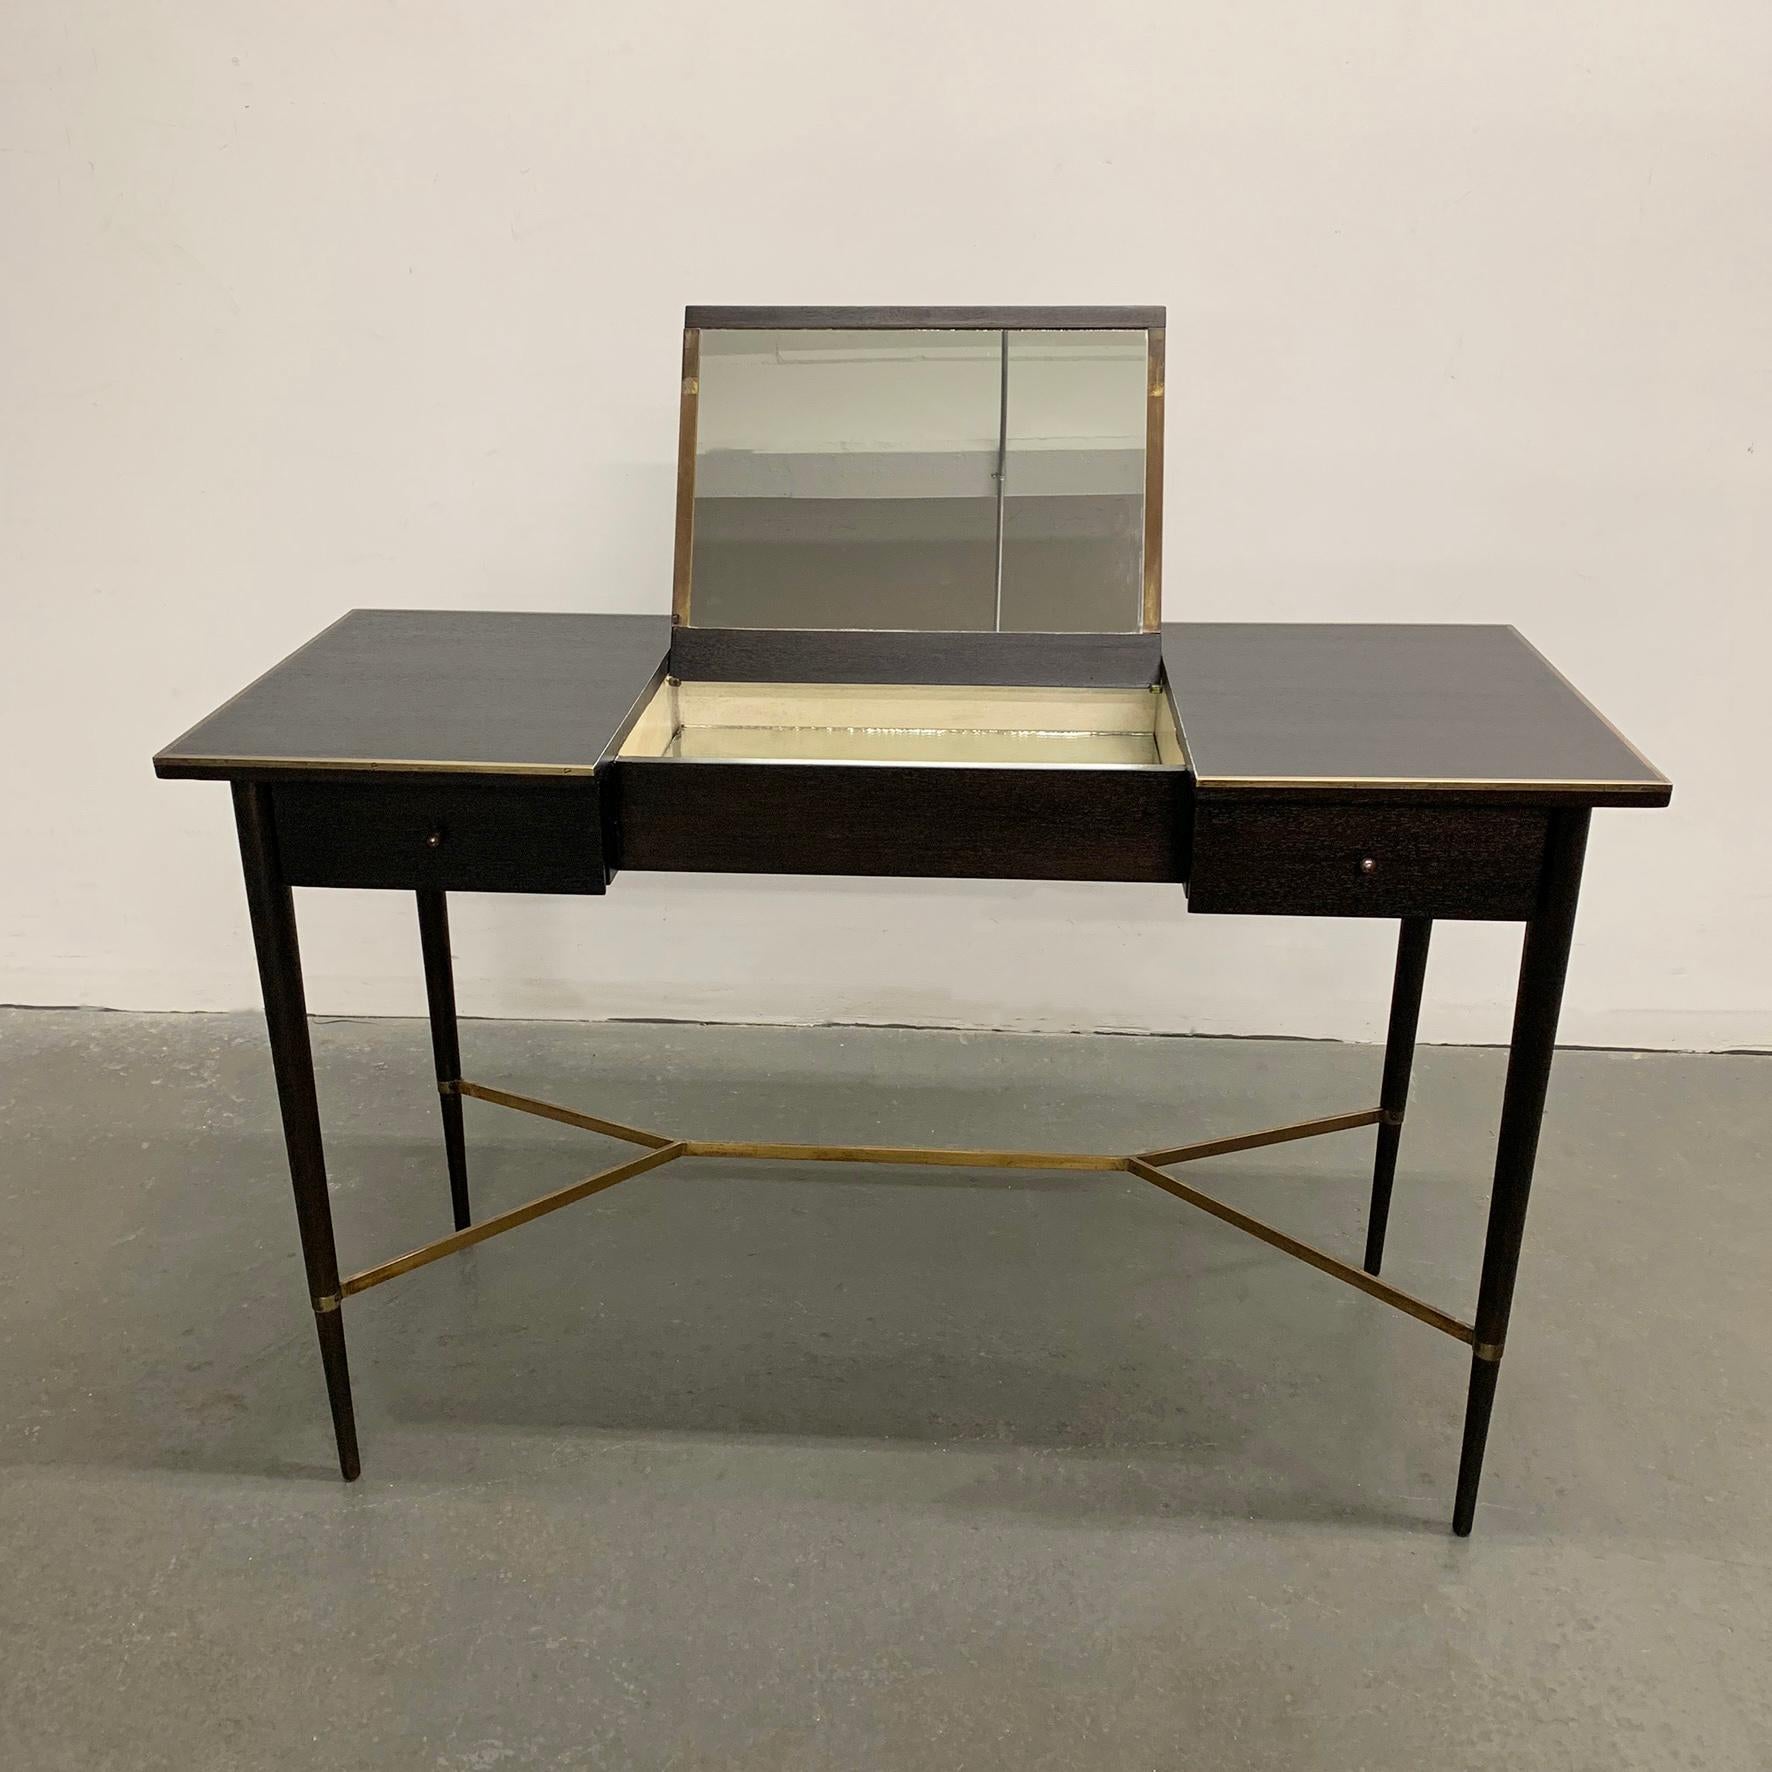 Mid-Century Modern, ebonized mahogany vanity table by Paul McCobb for Calvin, Irwin collection features beautifully tapered legs with brass stretcher, brass trim on top and 2 drawers with signature, hourglass, brass pulls. The vanity opens on top to